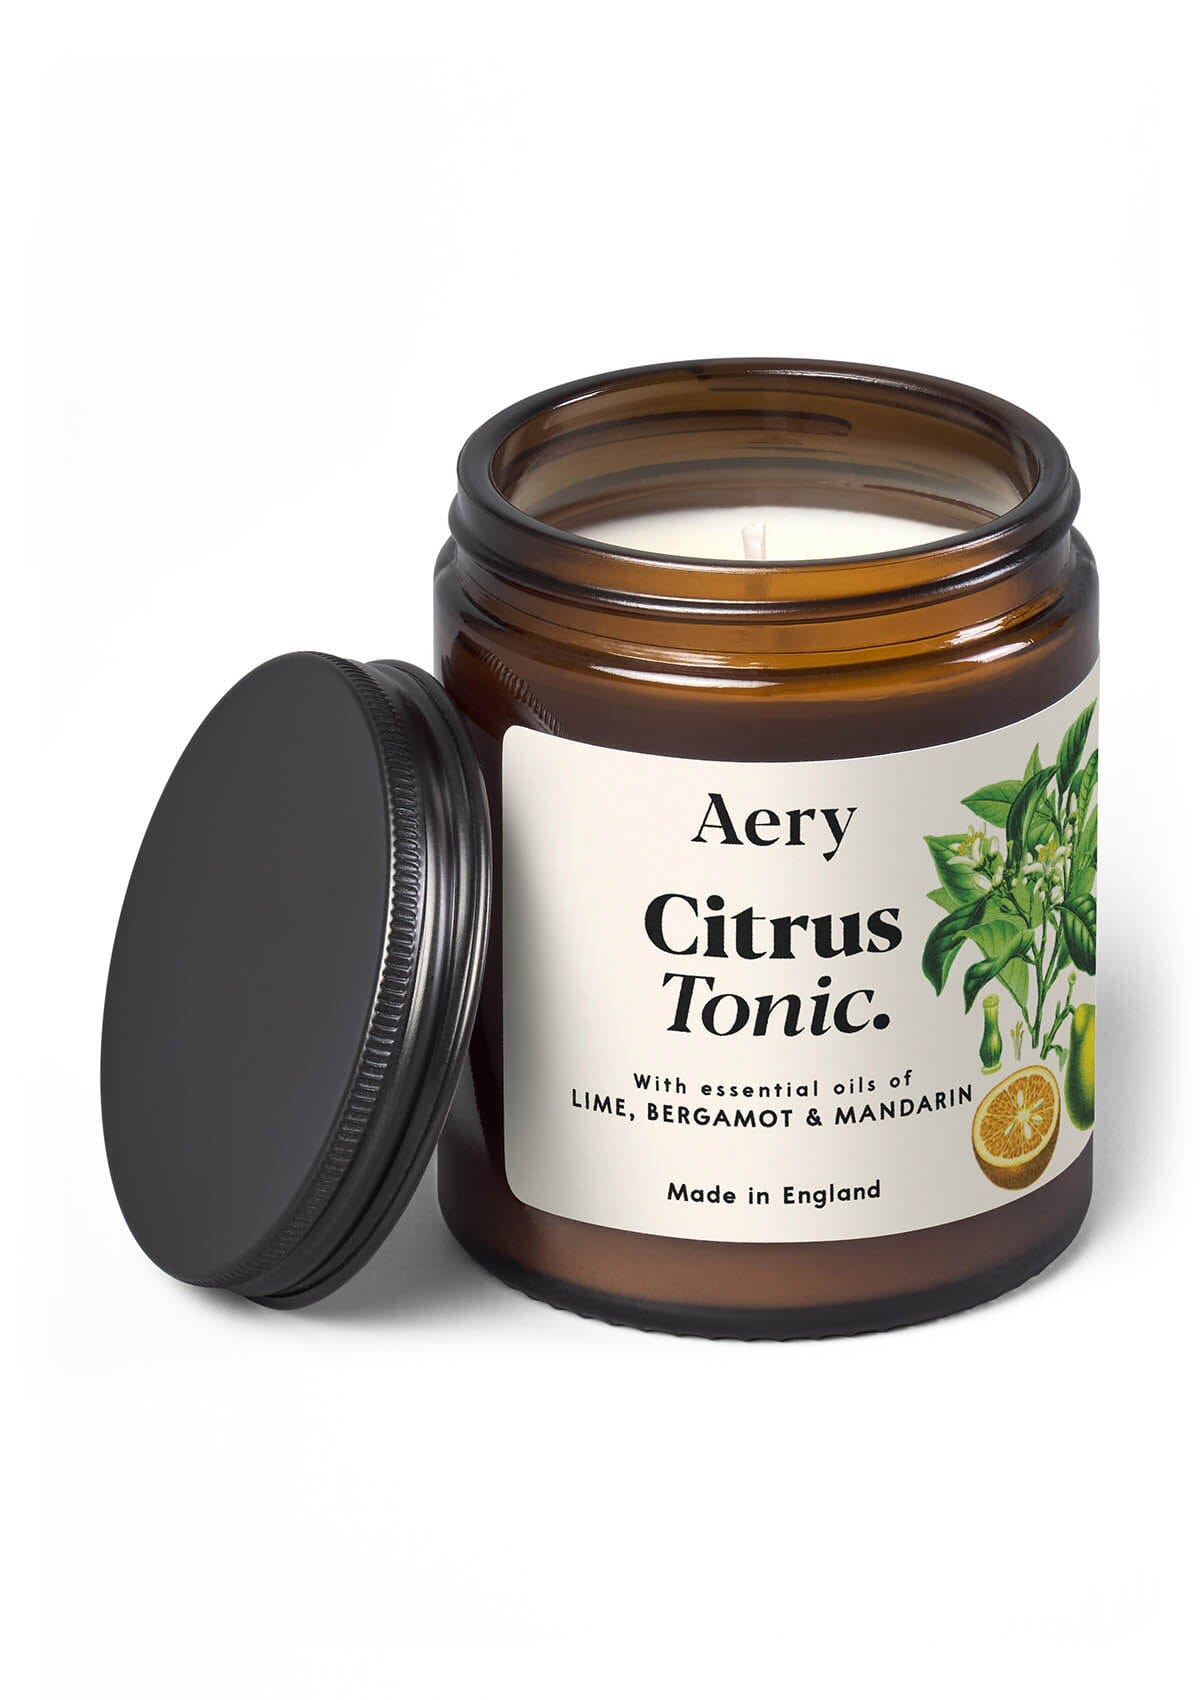 Citrus Tonic jar candle by Aery on white background 